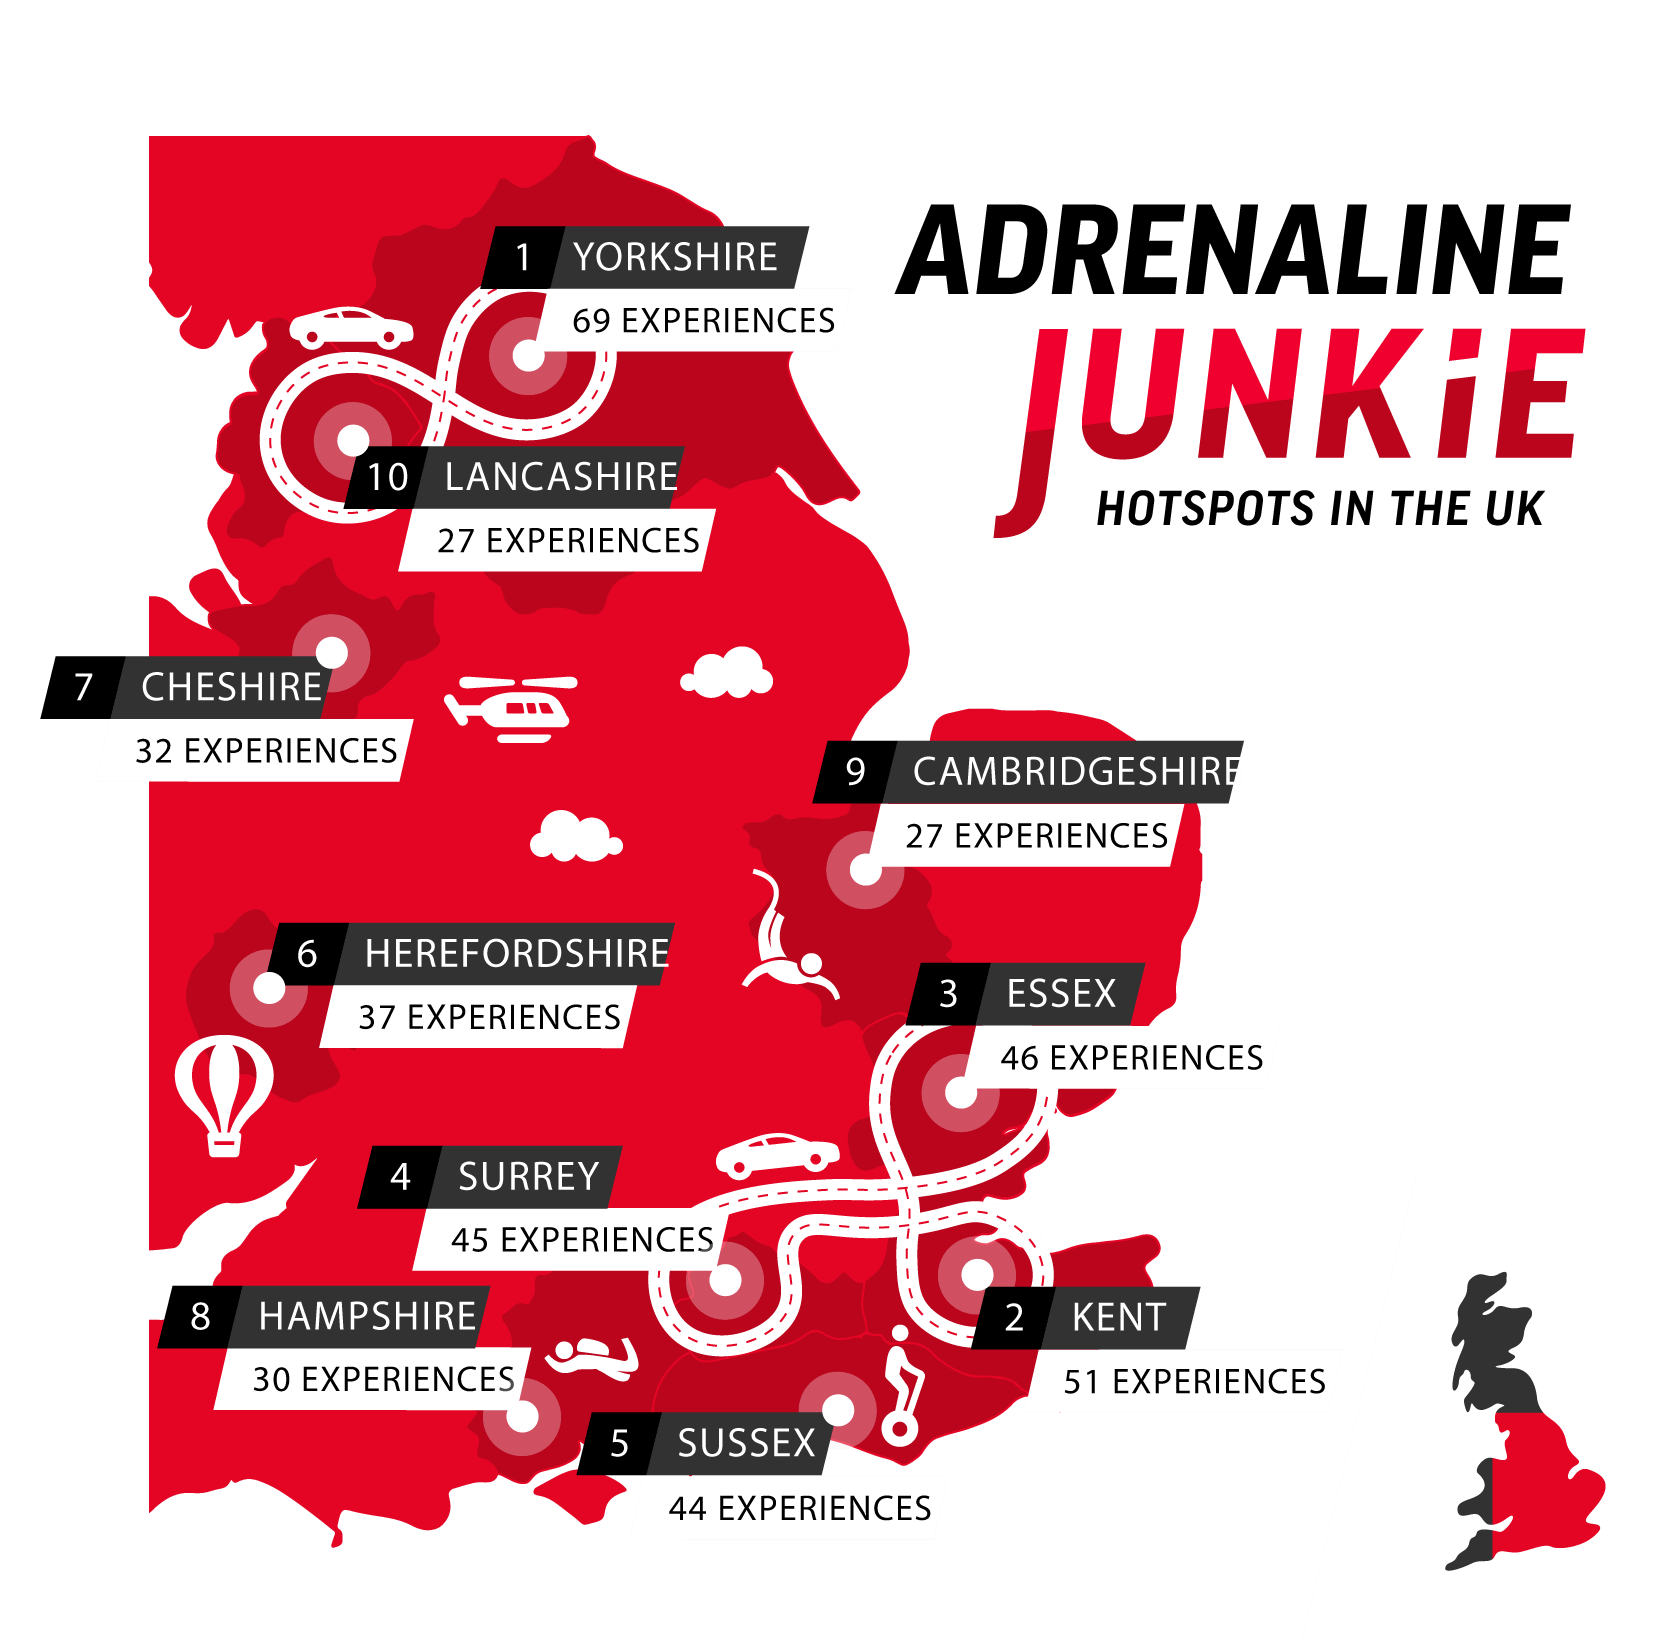 These Are the Best Locations for Adrenaline Junkies This Summer